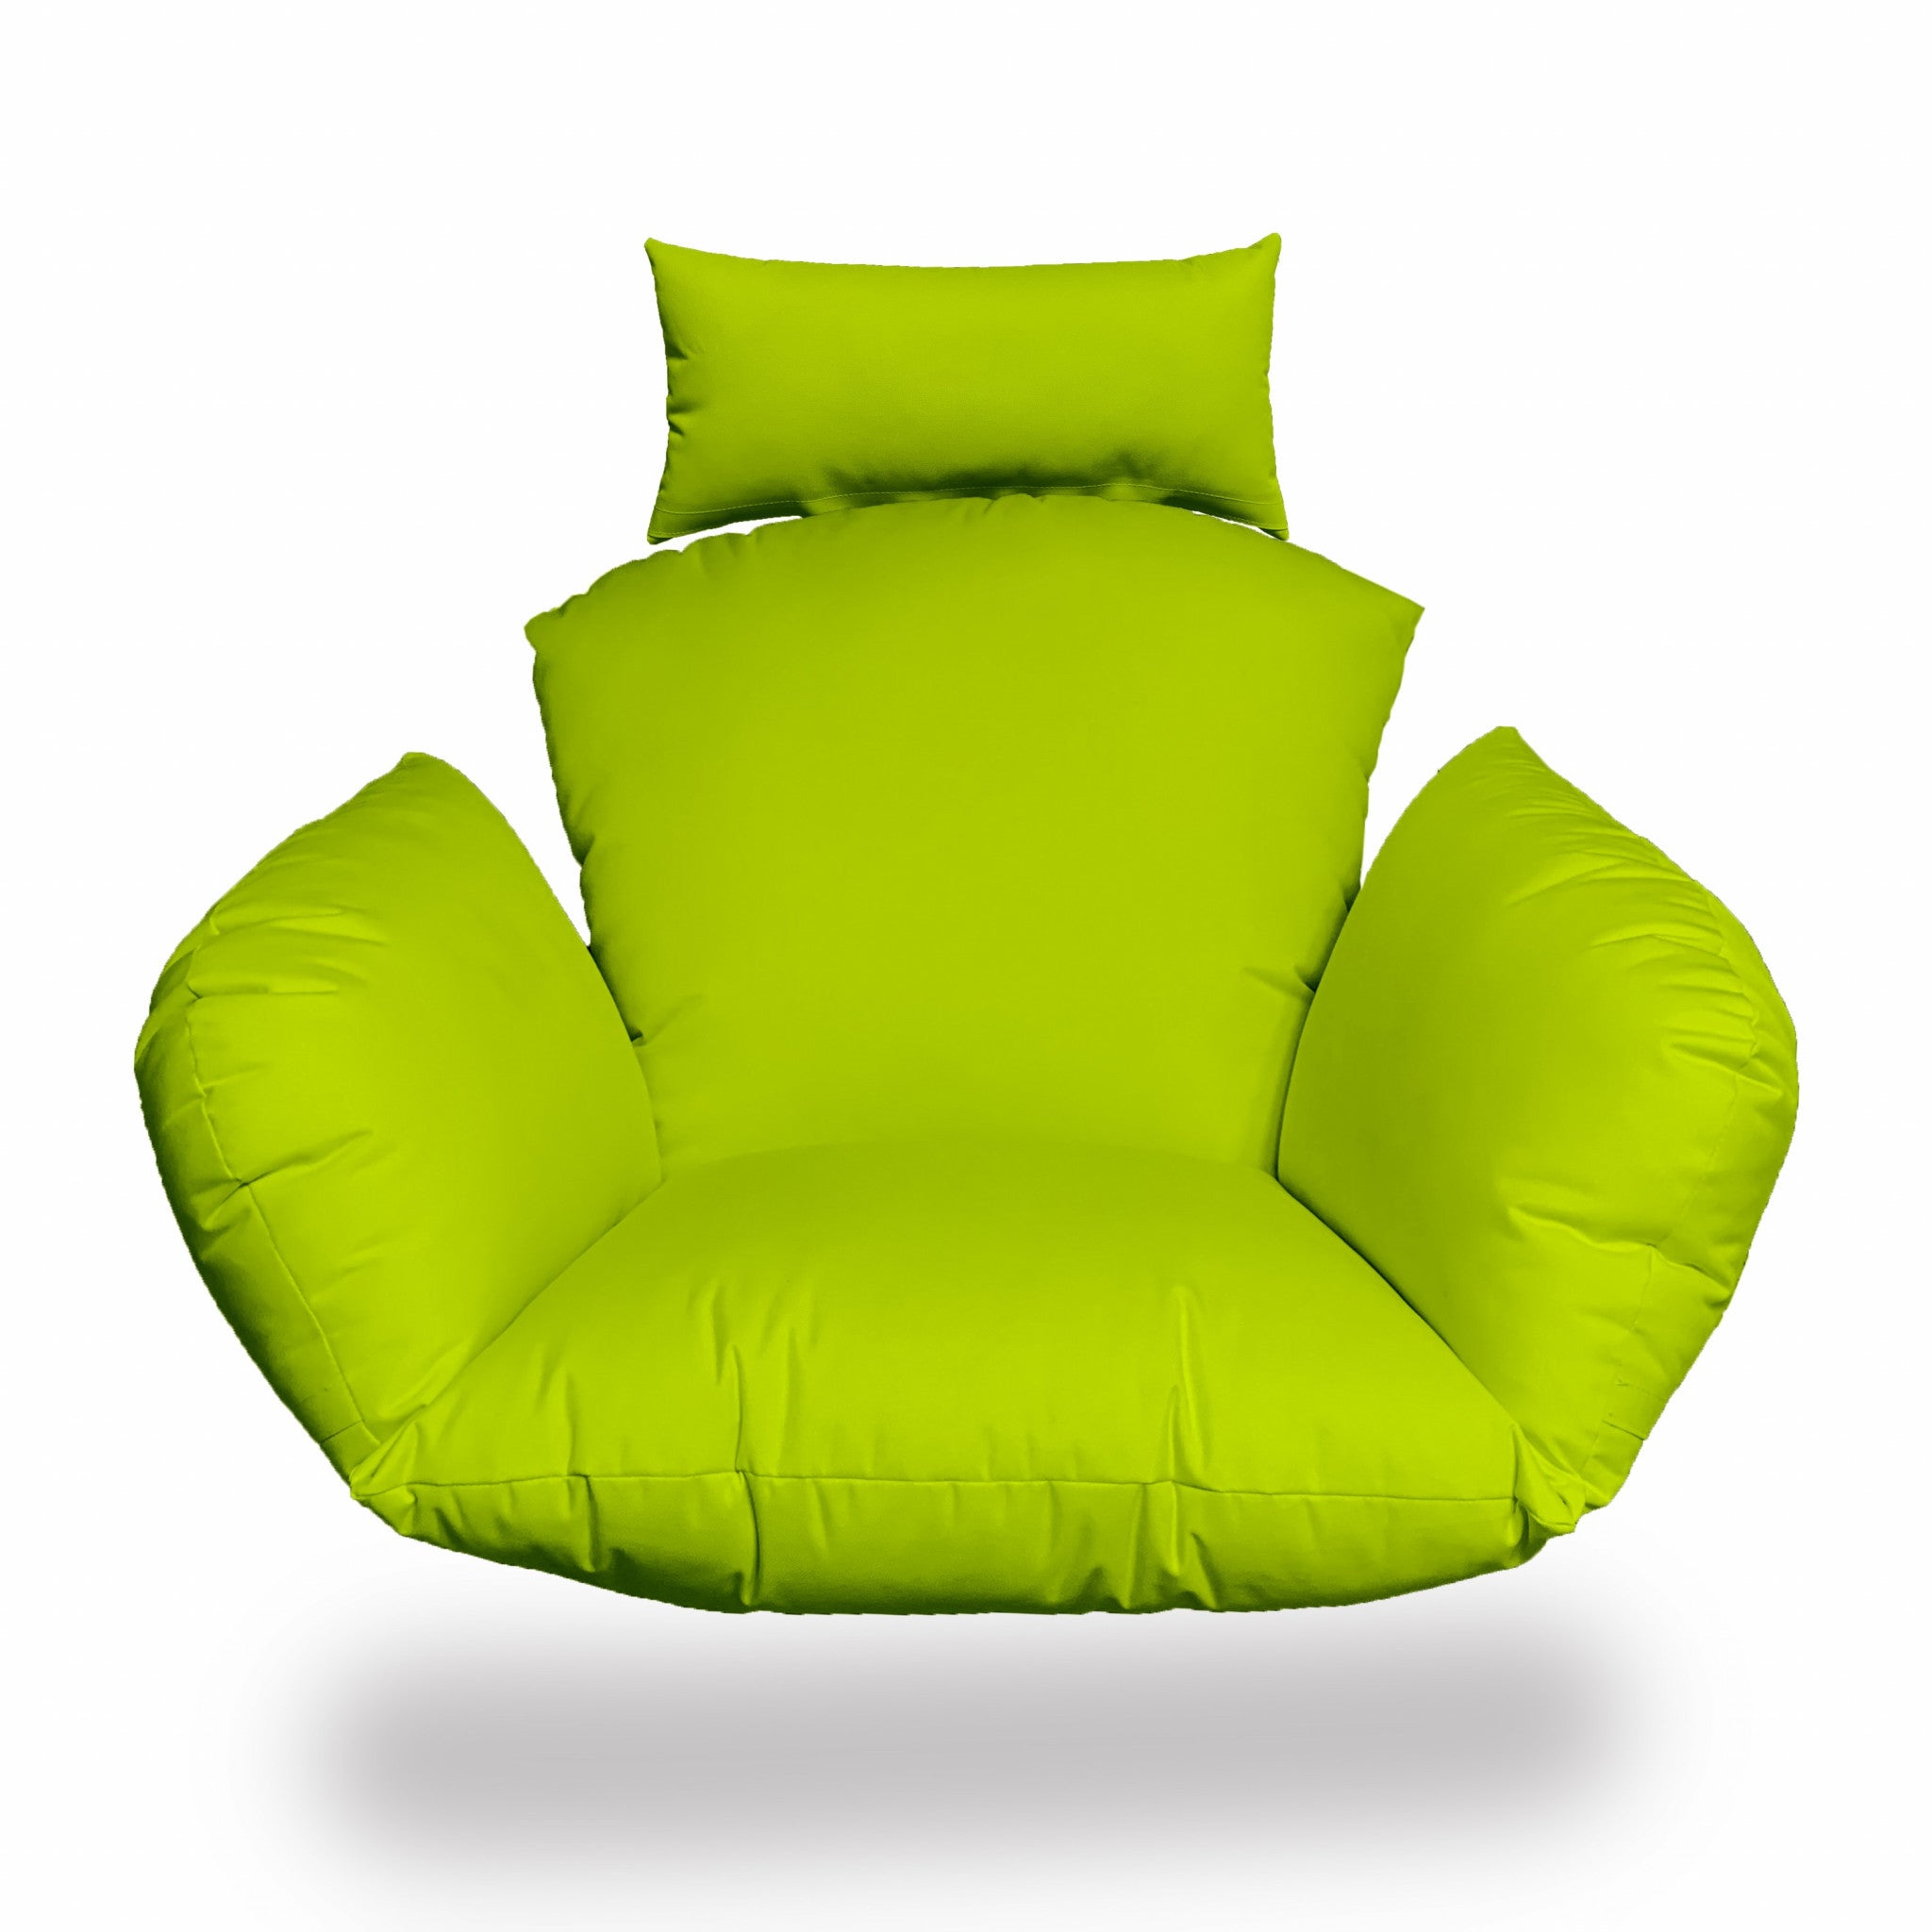 Primo Neon Green Indoor Outdoor Replacement Cushion for Egg Chair